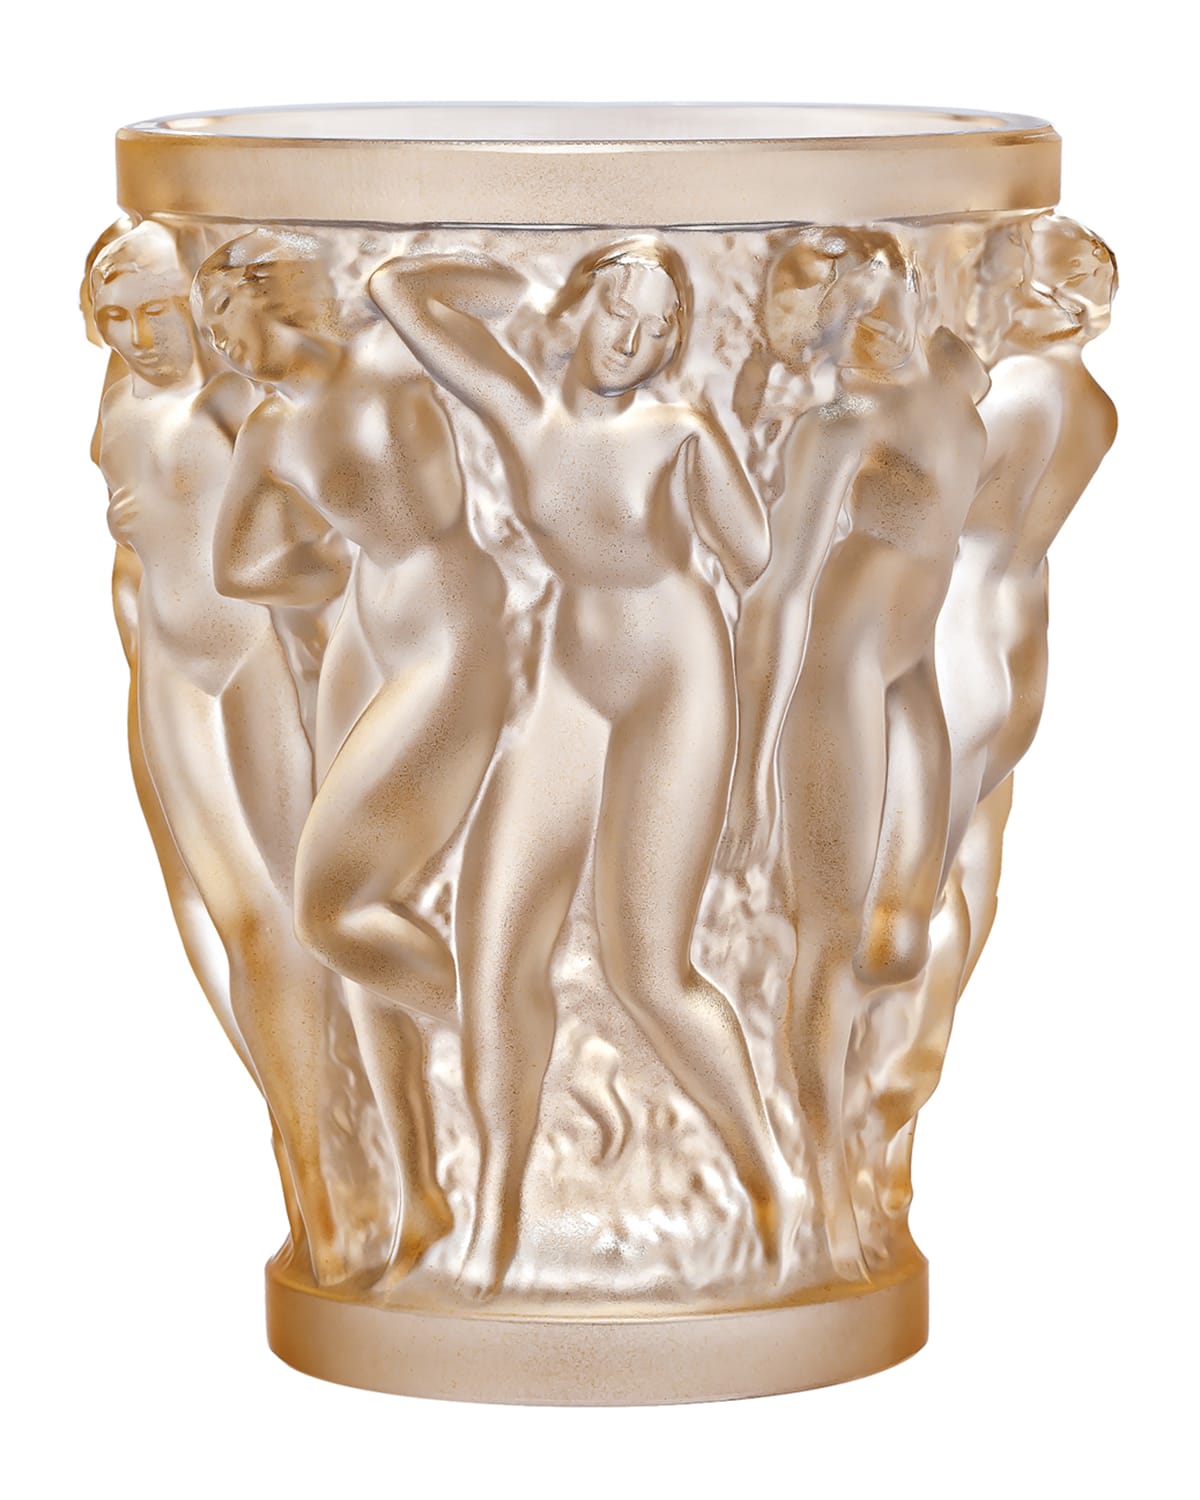 LALIQUE BACCHANTES SMALL GOLD-LUSTER VASE